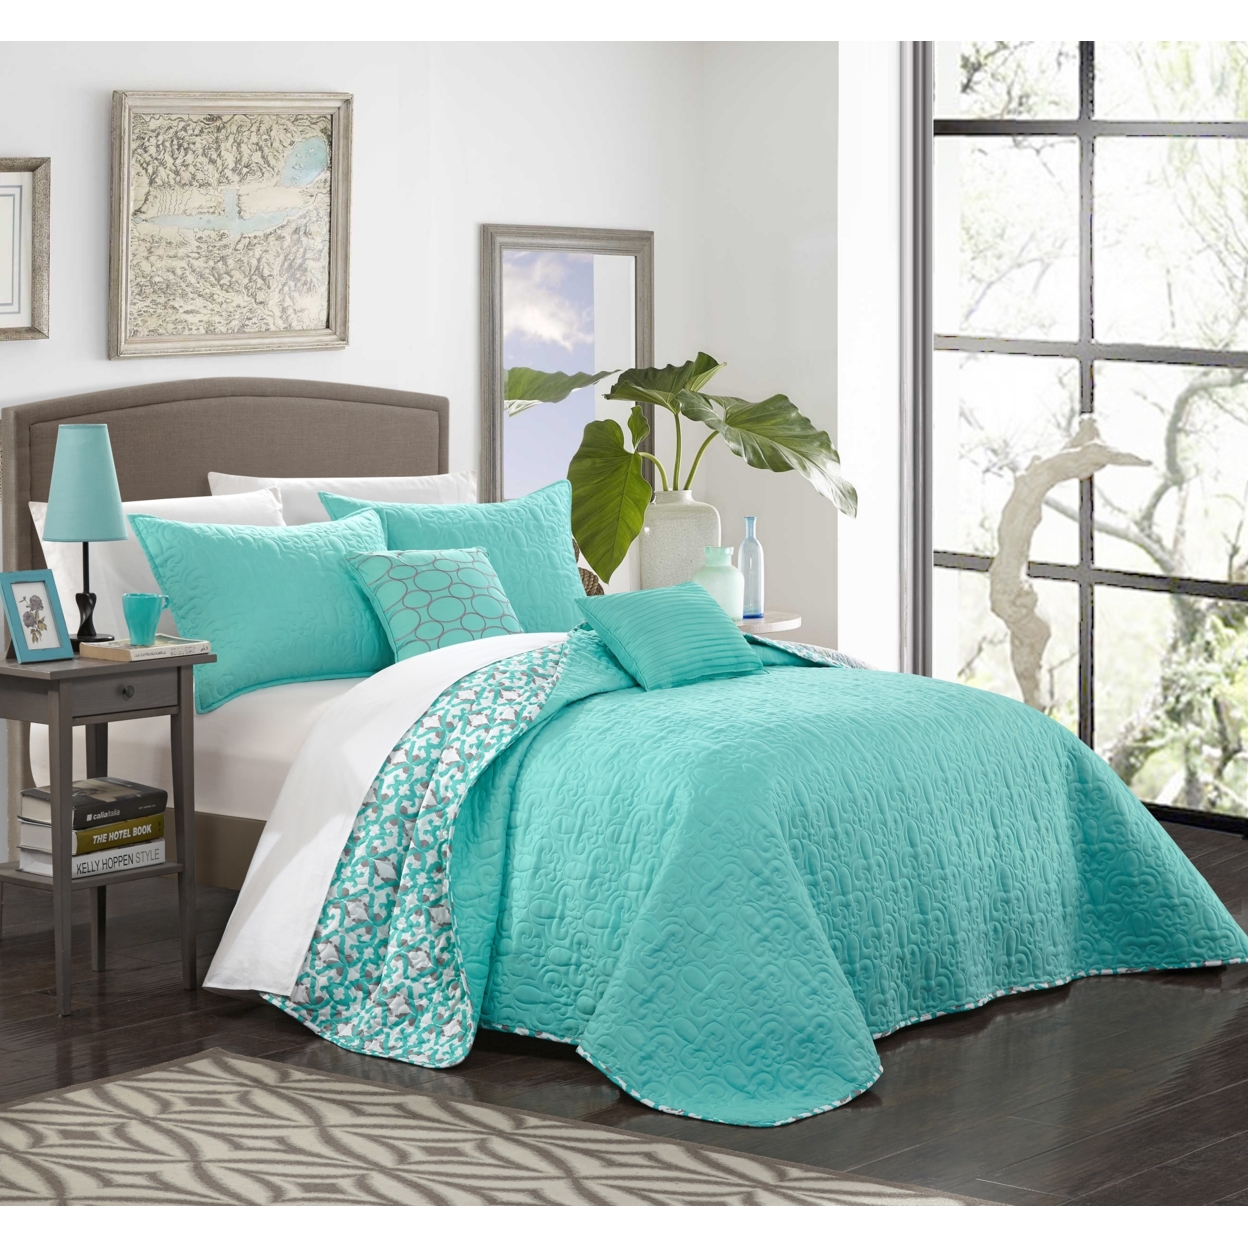 5 Piece Nalla Quilted Flor De Lis Patterned REVERSIBLE Printed Quilt Set, Shams And Decorative Pillows Included - Aqua, Twin